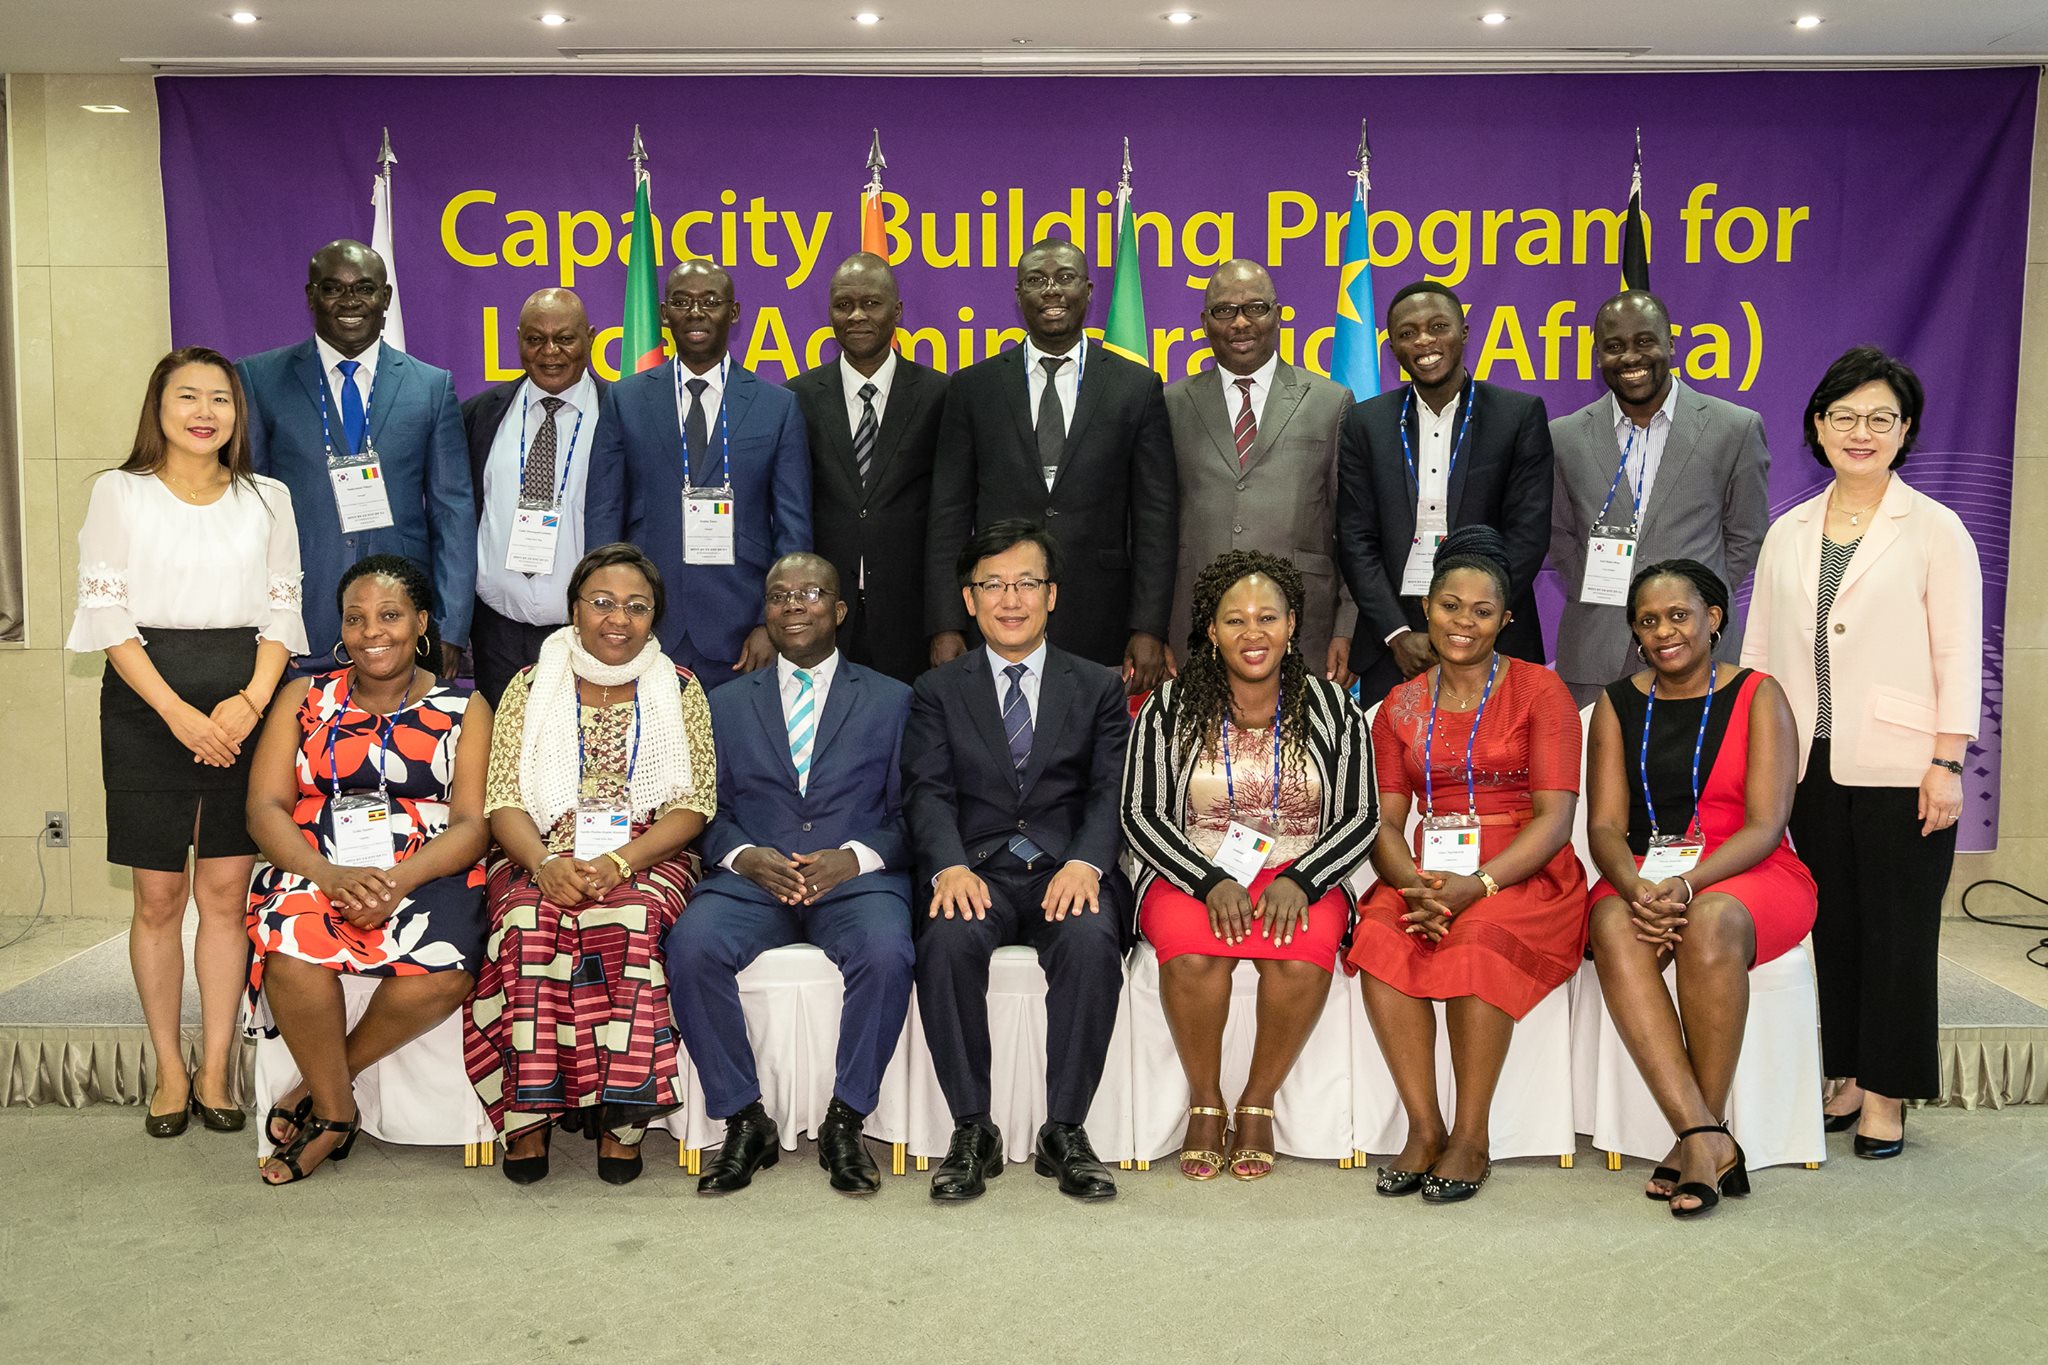 Officials from five African countries prepare to reinforce administrative capacity in Korea 큰 이미지[마우스 클릭 시 창닫기]